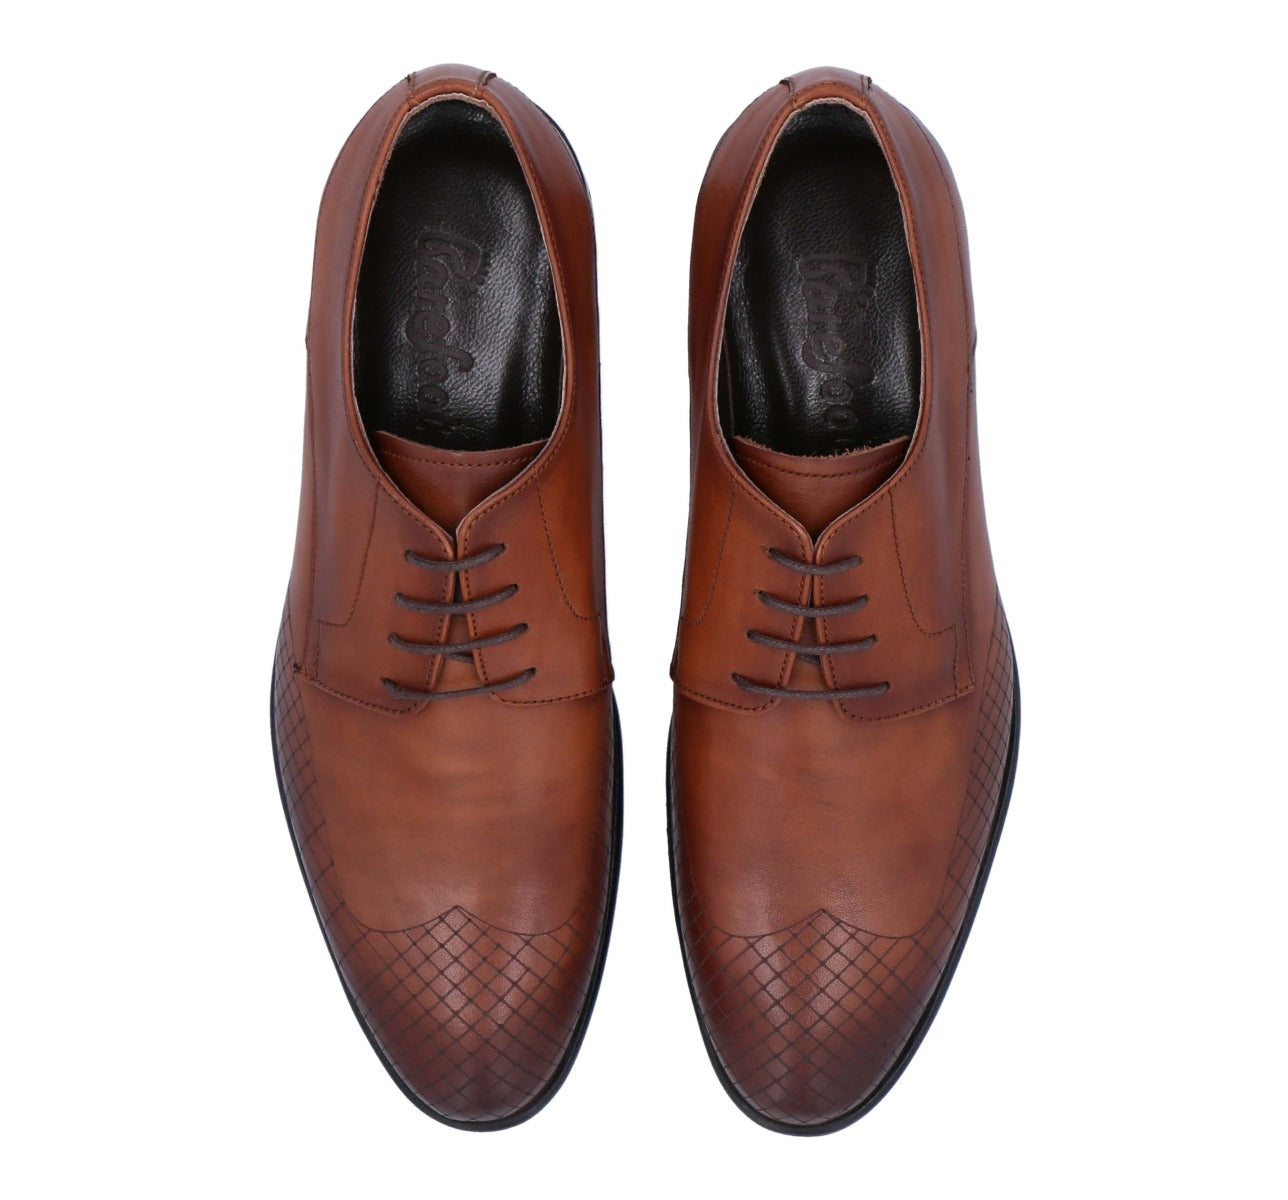 Barefoot Brown Formal Derby's with Black Sole For Men 6214